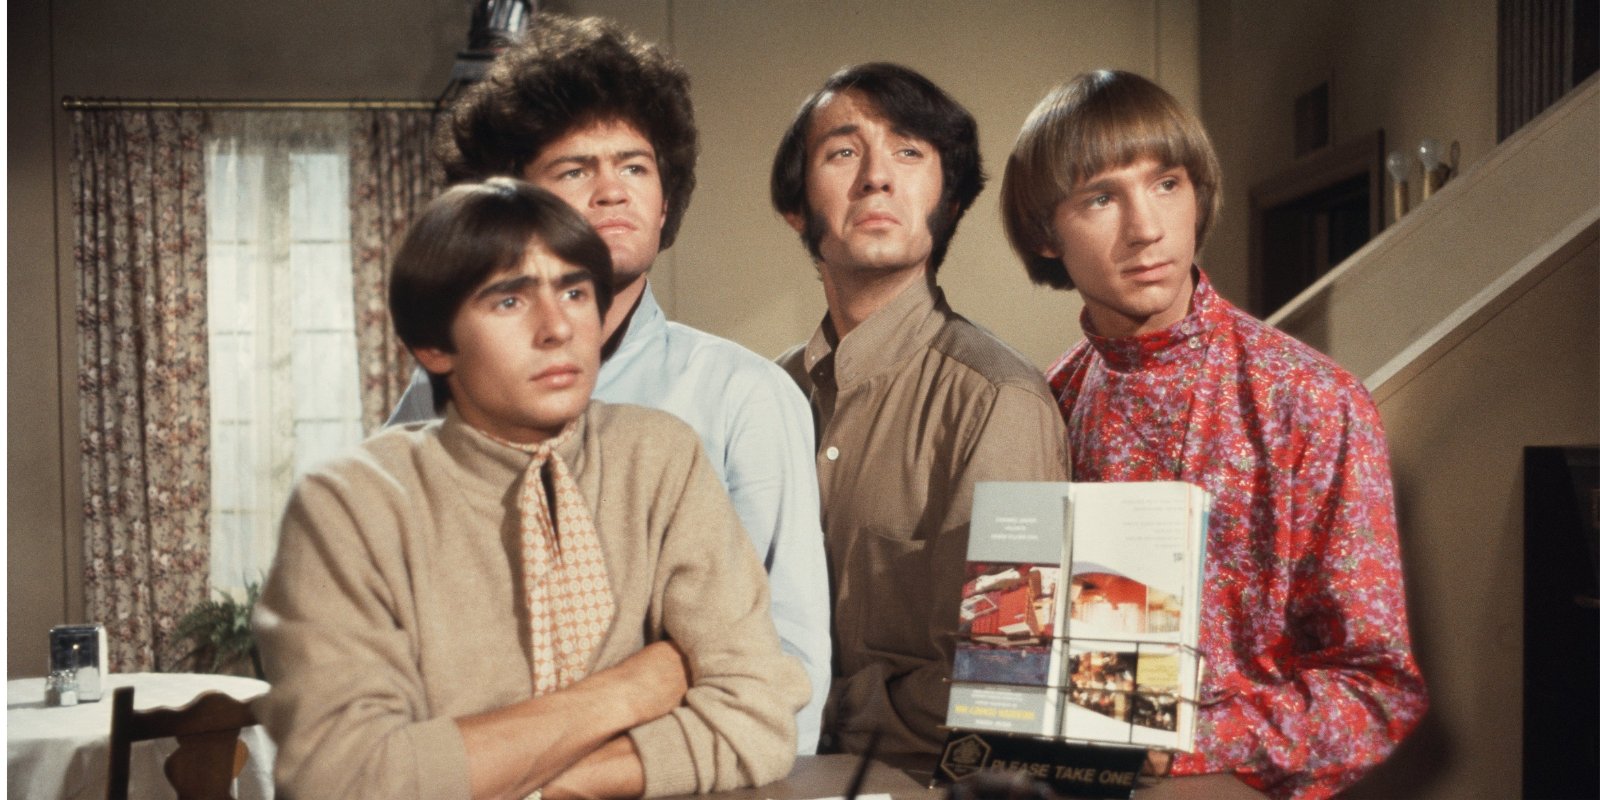 Peter Tork Claims Mike Nesmith Didn’t Want to Be ‘Trapped’ by the Monkees, and Didn’t Think He Was Wrong in Saying That